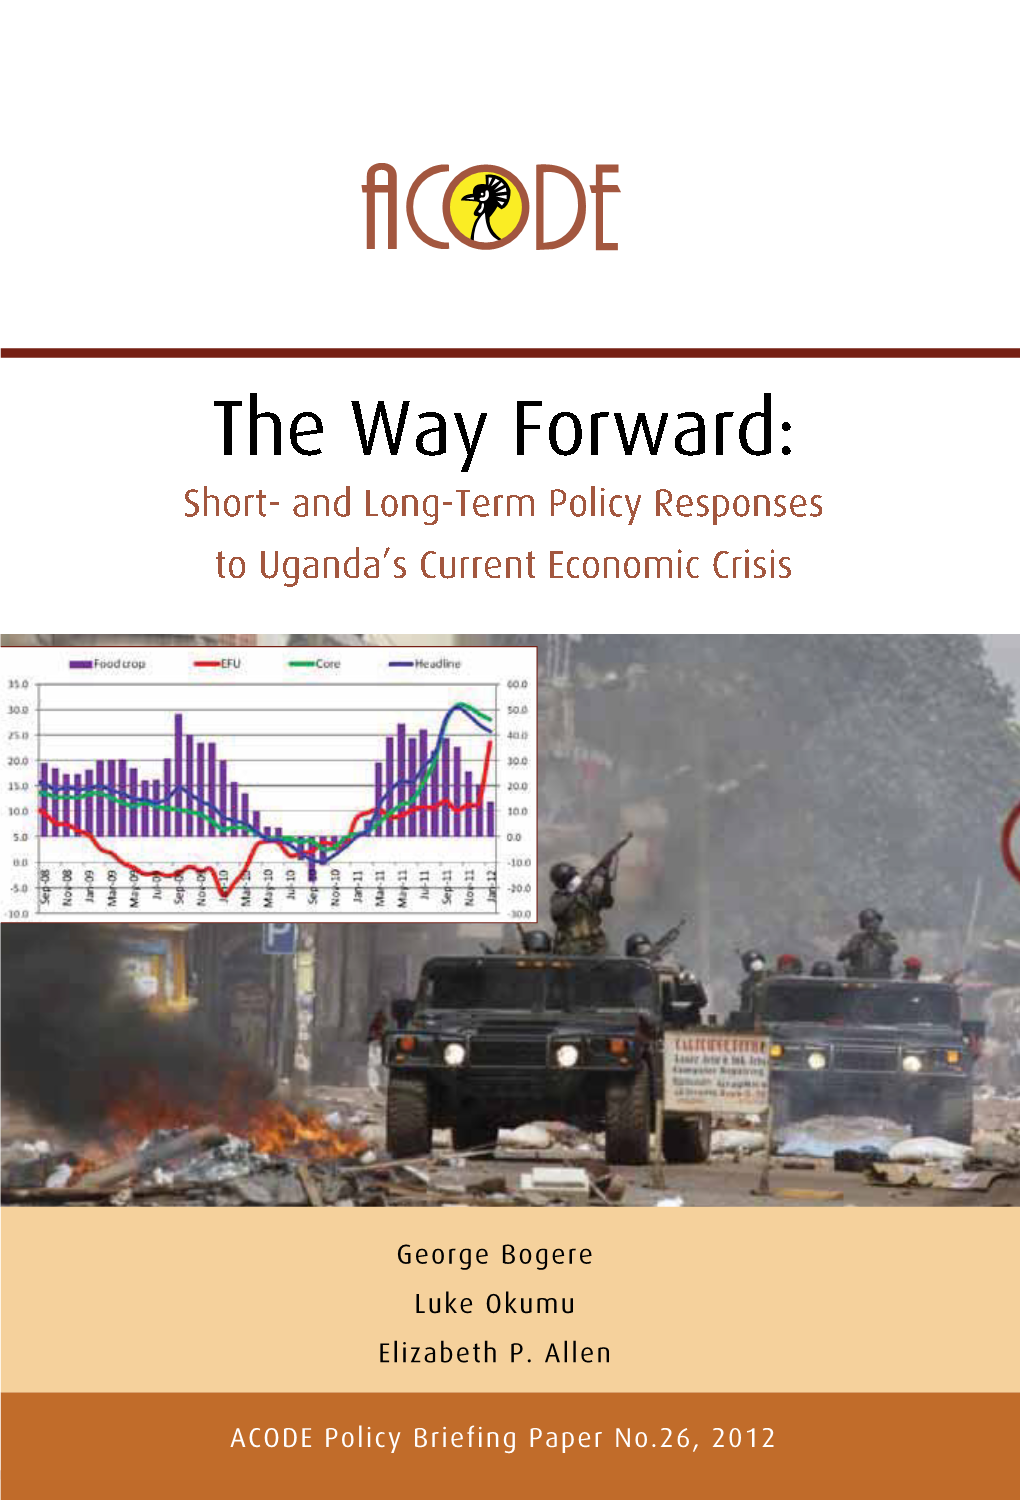 The Way Forward: Short- and Long-Term Policy Responses to Uganda's Economic